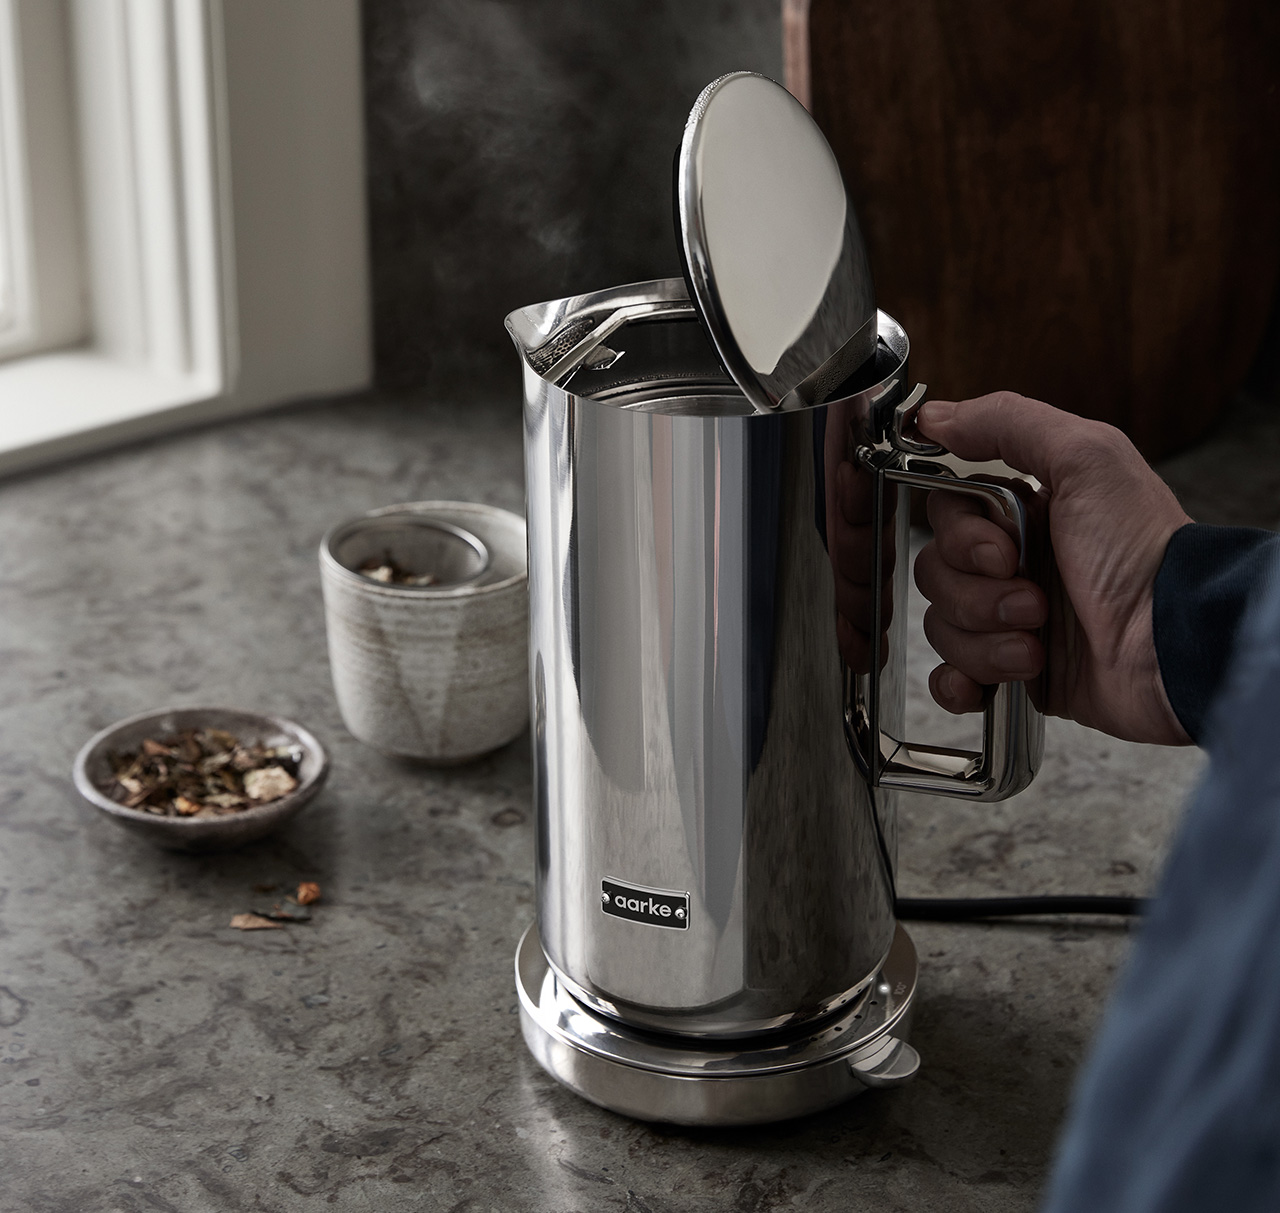 Metallic Minimalism Comes to a Boil With the Aarke Kettle